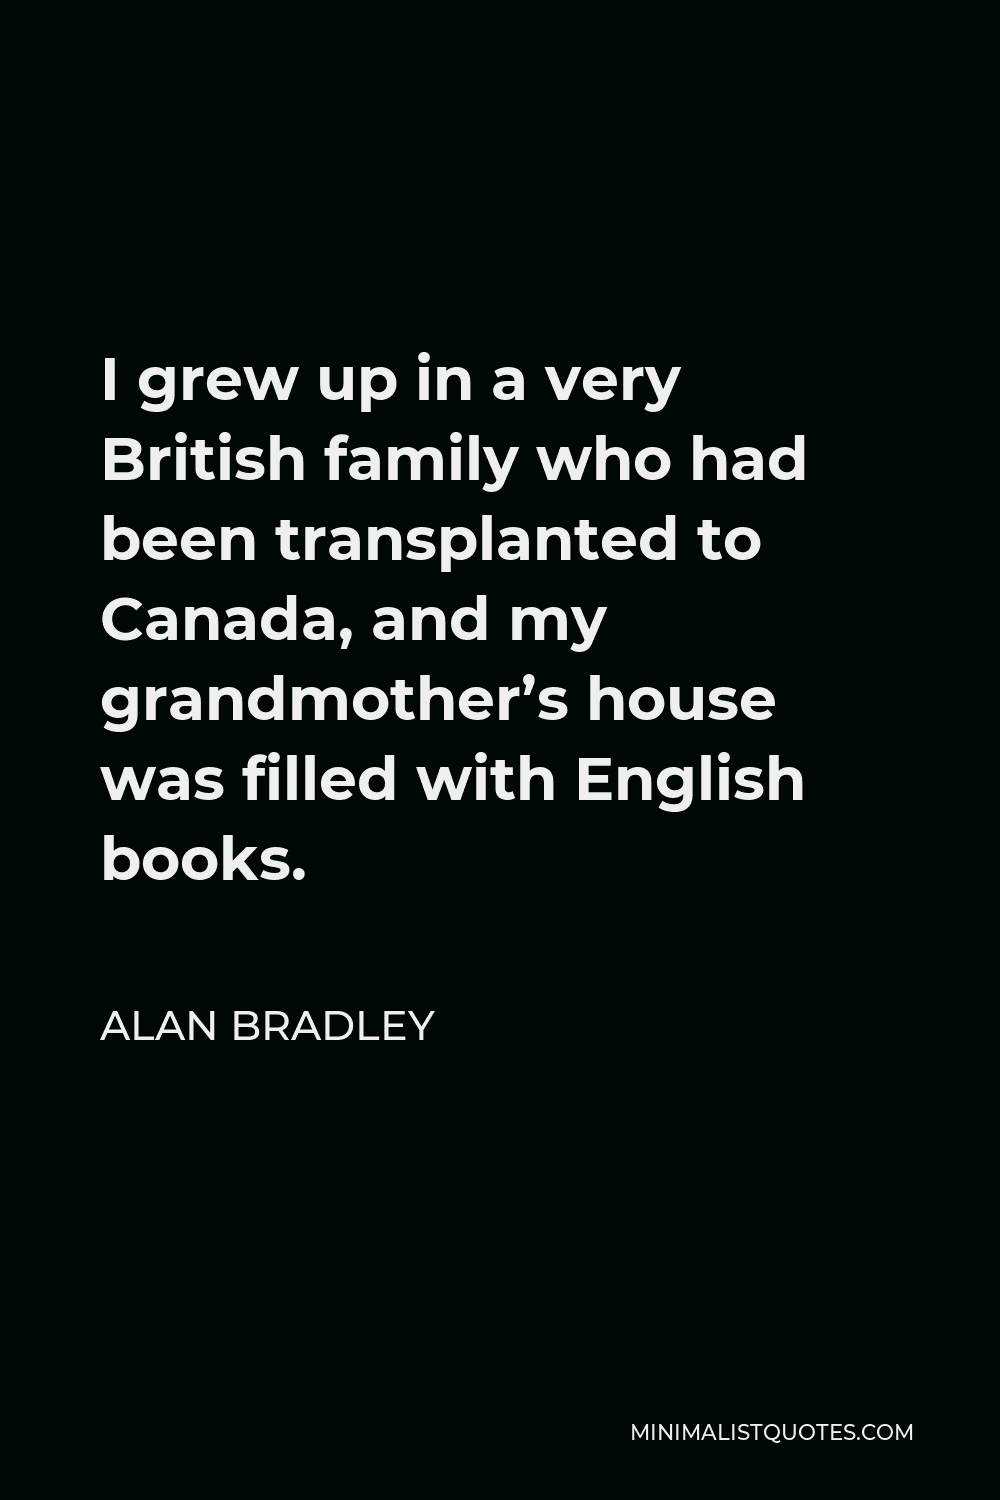 Alan Bradley Quote - I grew up in a very British family who had been transplanted to Canada, and my grandmother’s house was filled with English books.